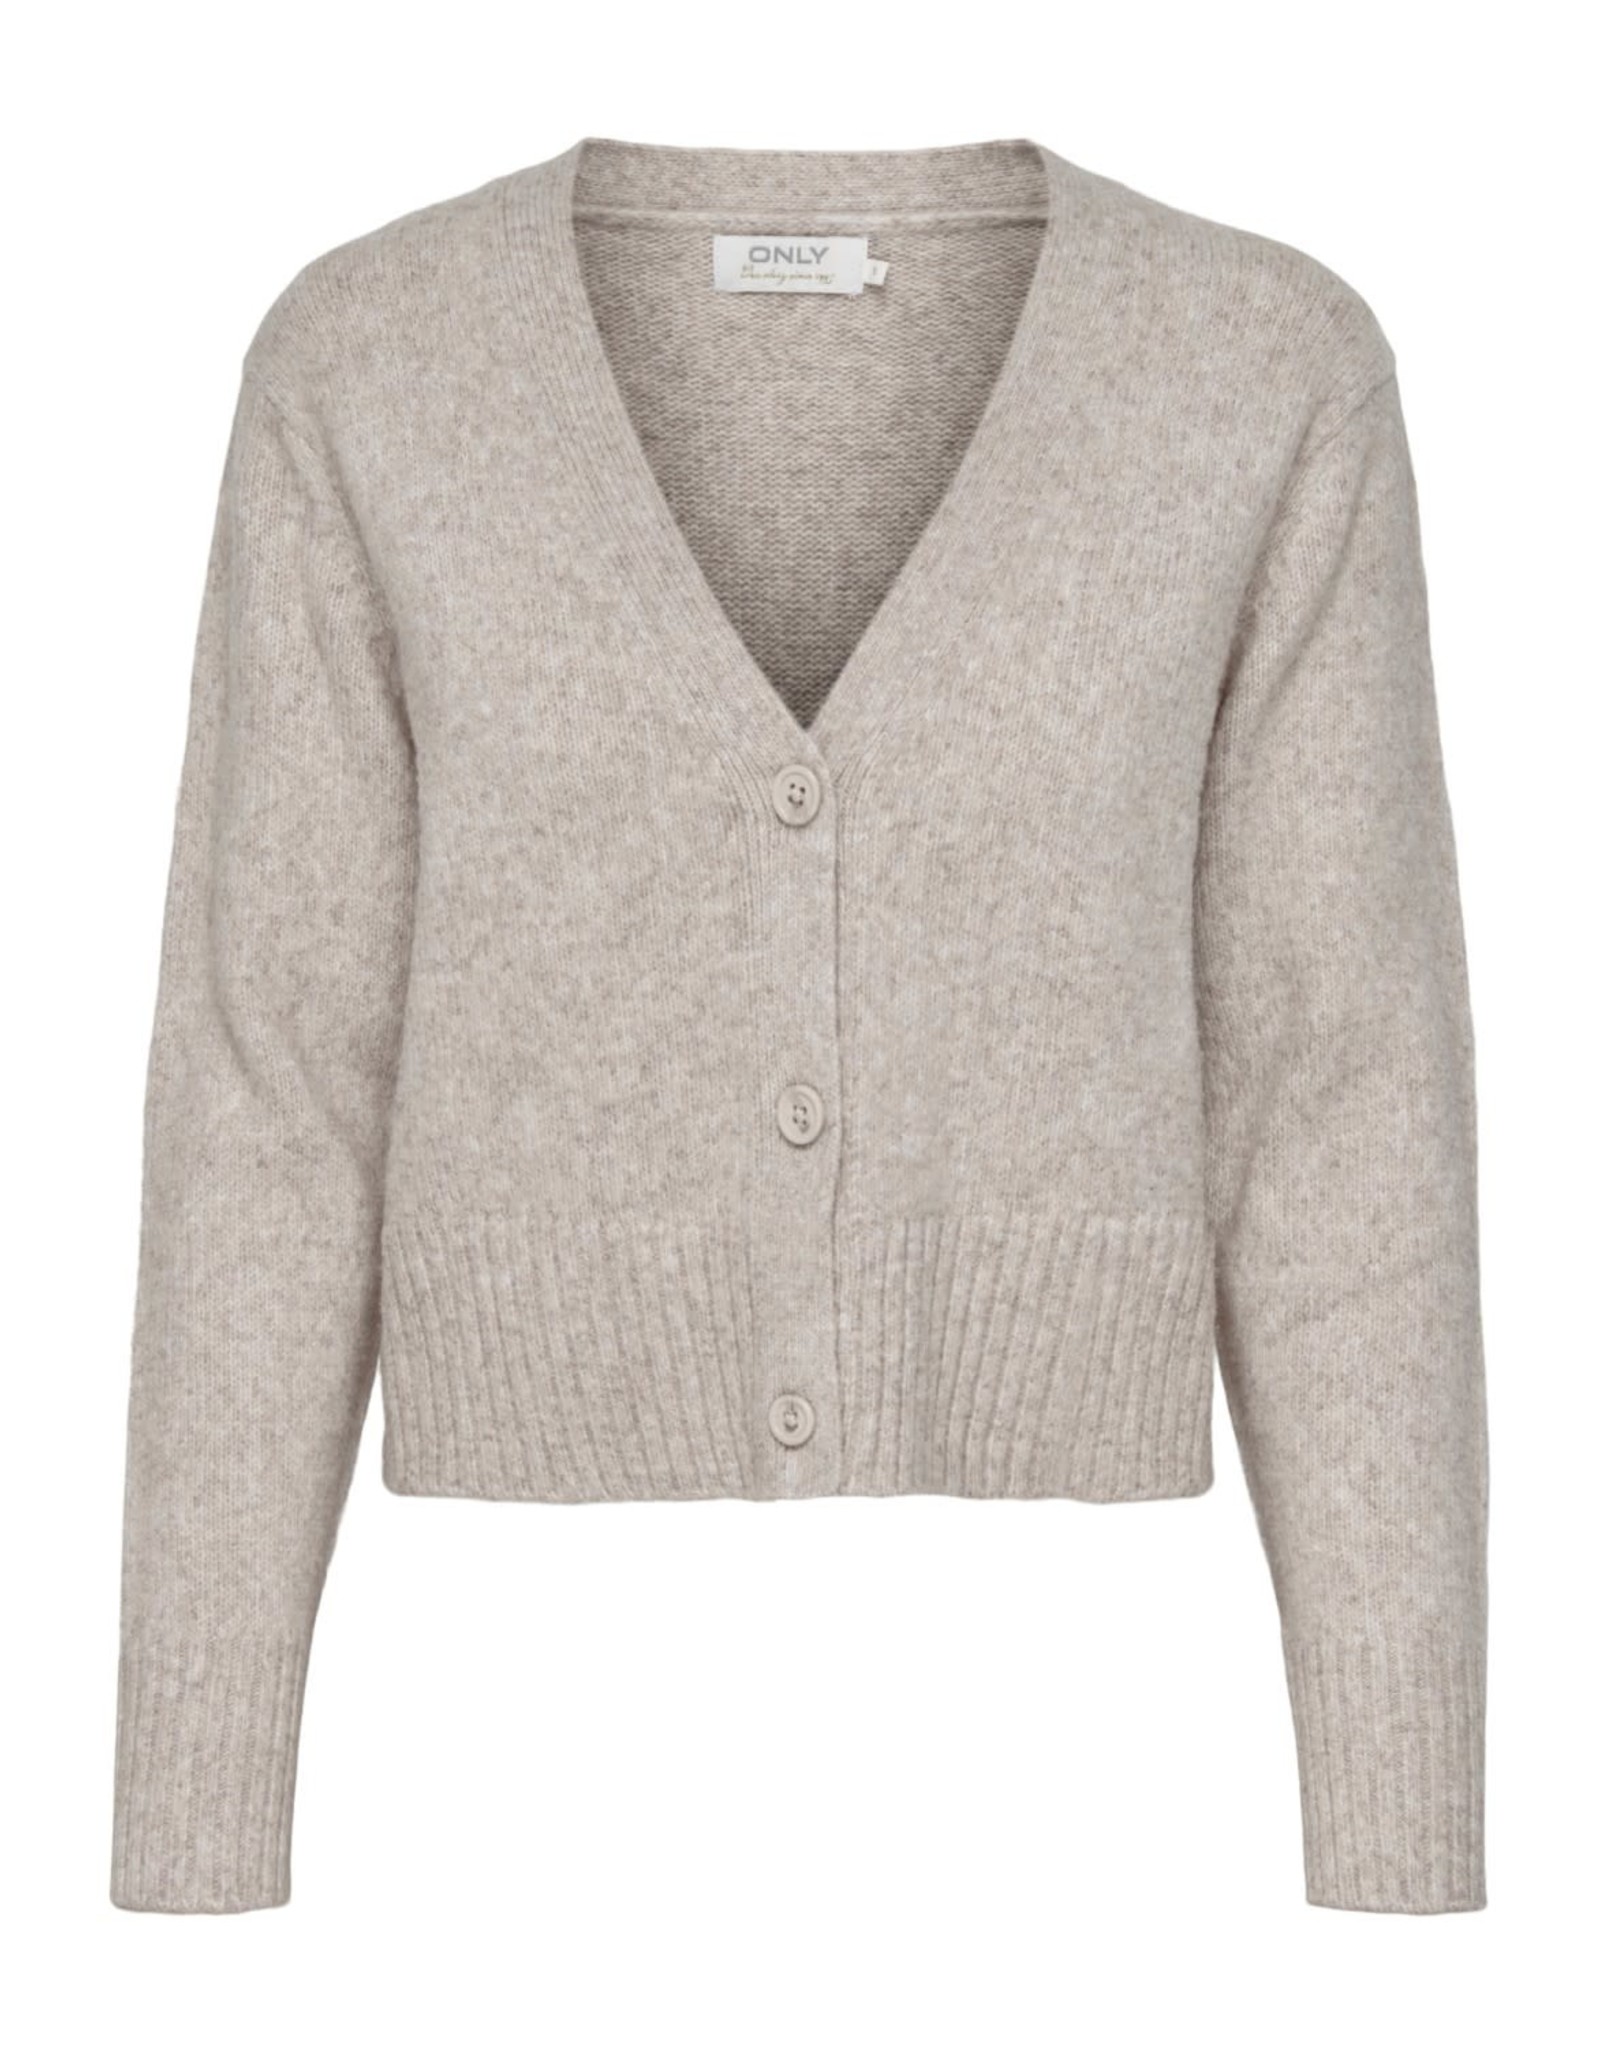 ONLY Macadamia button cardigan knit - Oatmeal melange